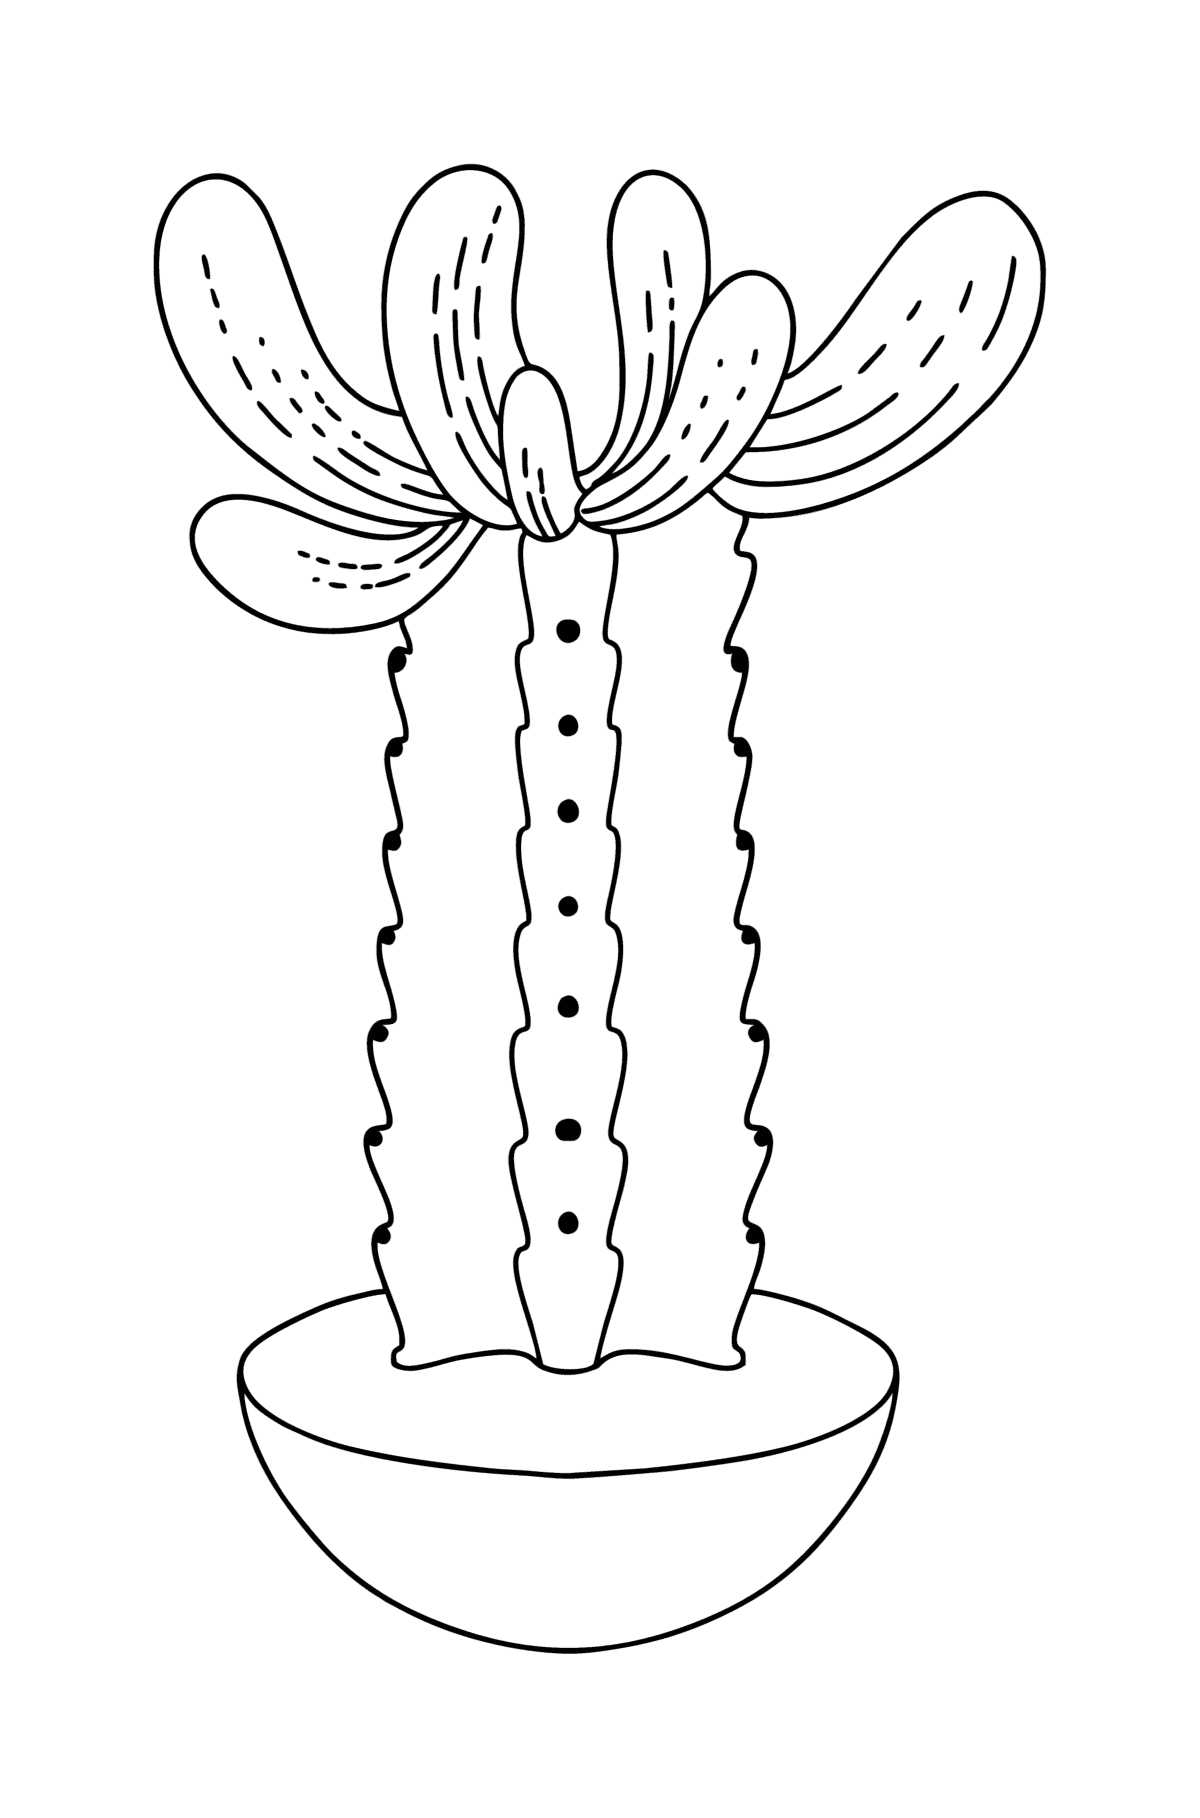 Simple cactus coloring page - Coloring Pages for Kids